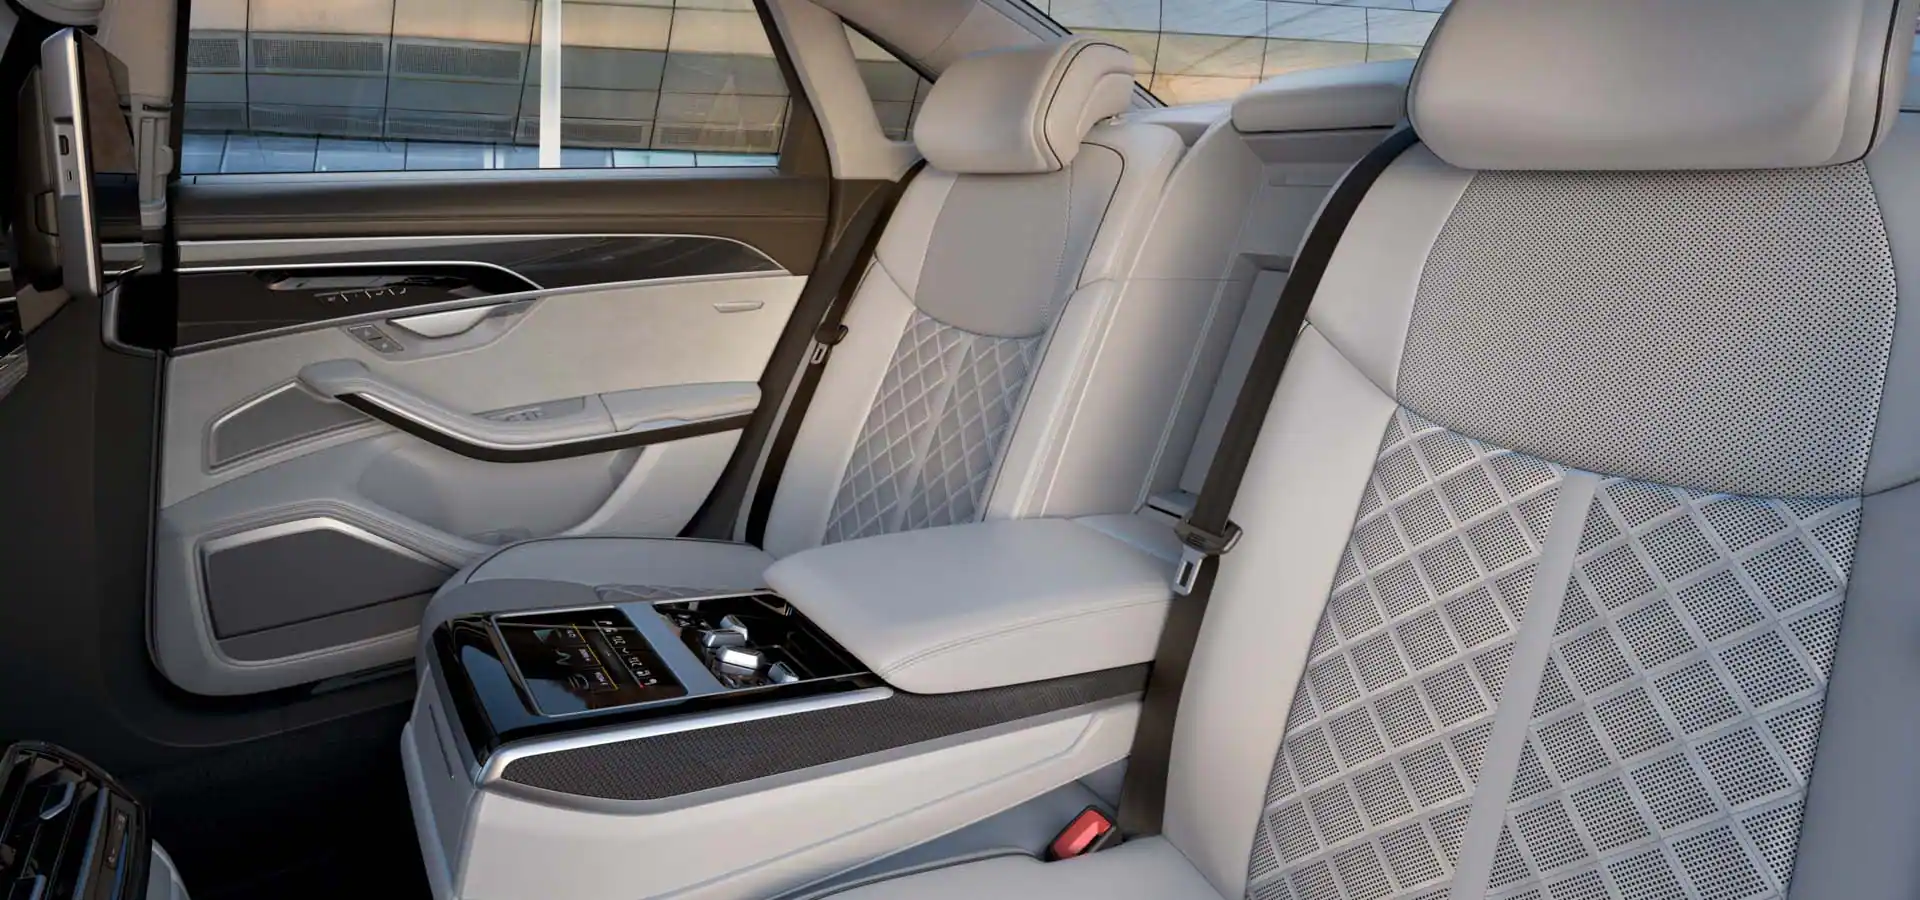 white audi s8 rear seats with middle seat folded down